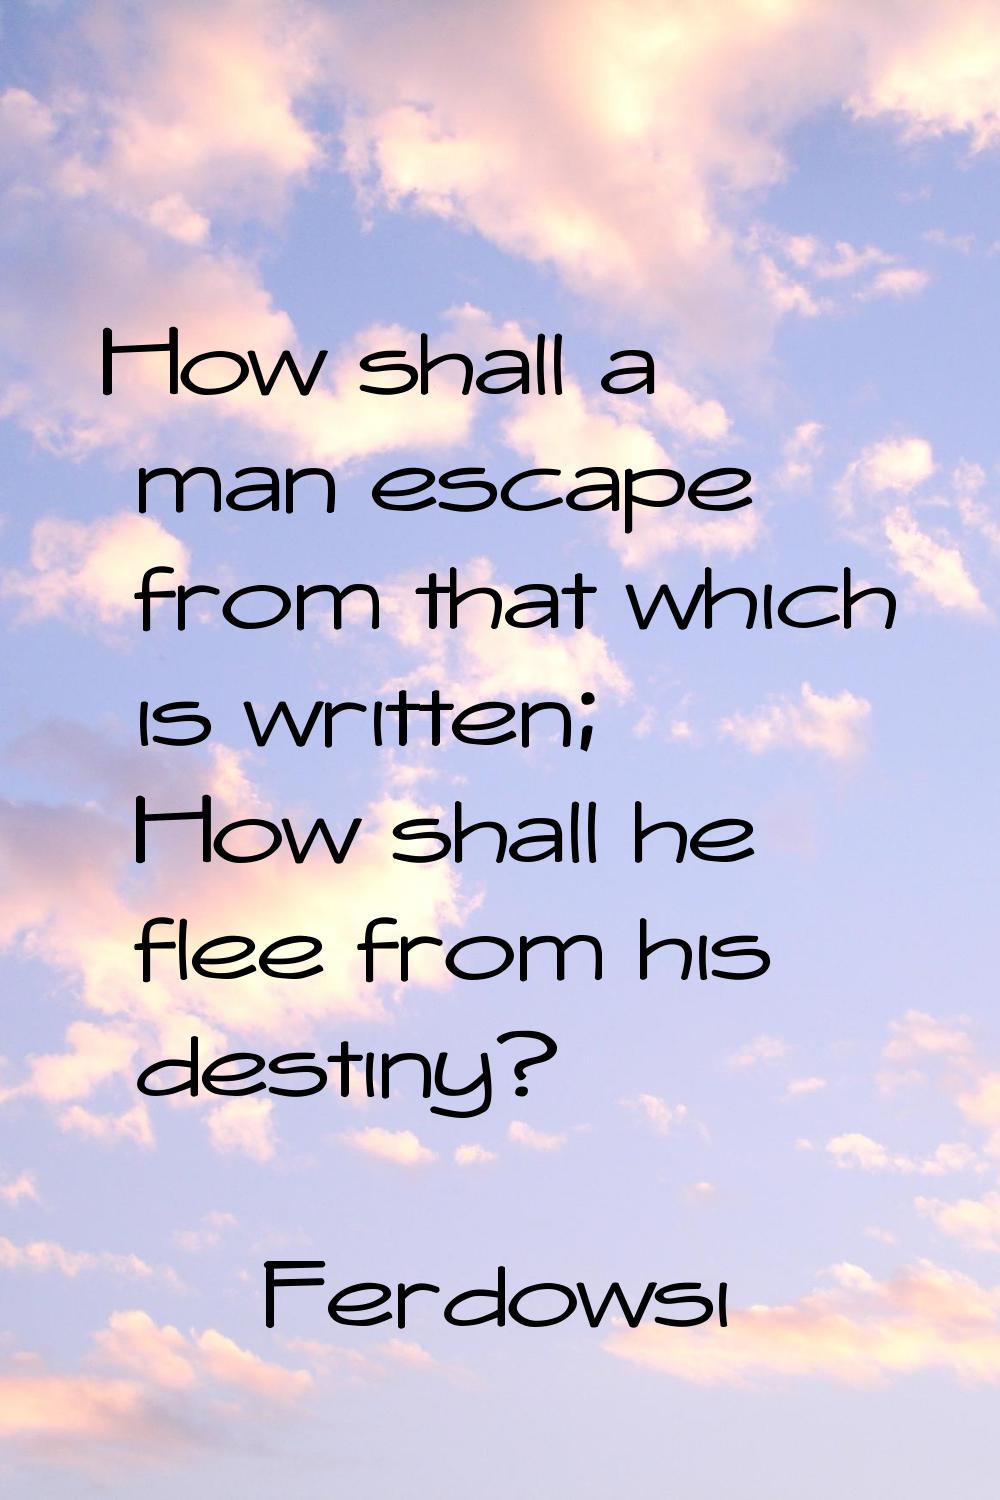 How shall a man escape from that which is written; How shall he flee from his destiny?